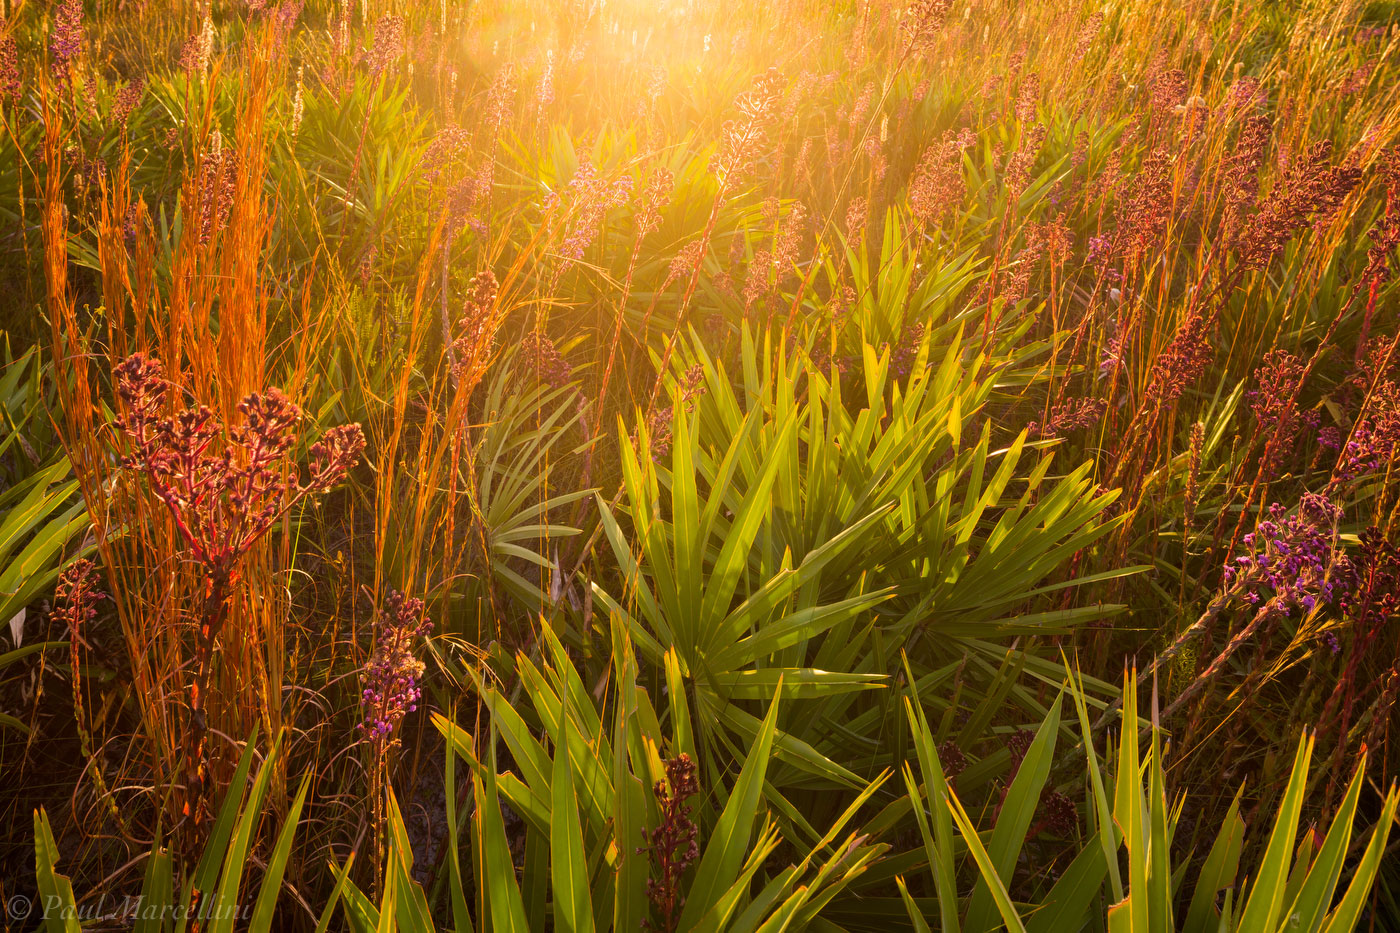 Sunrise light over a diverse mix of plants in the Kissimmee Prairie.